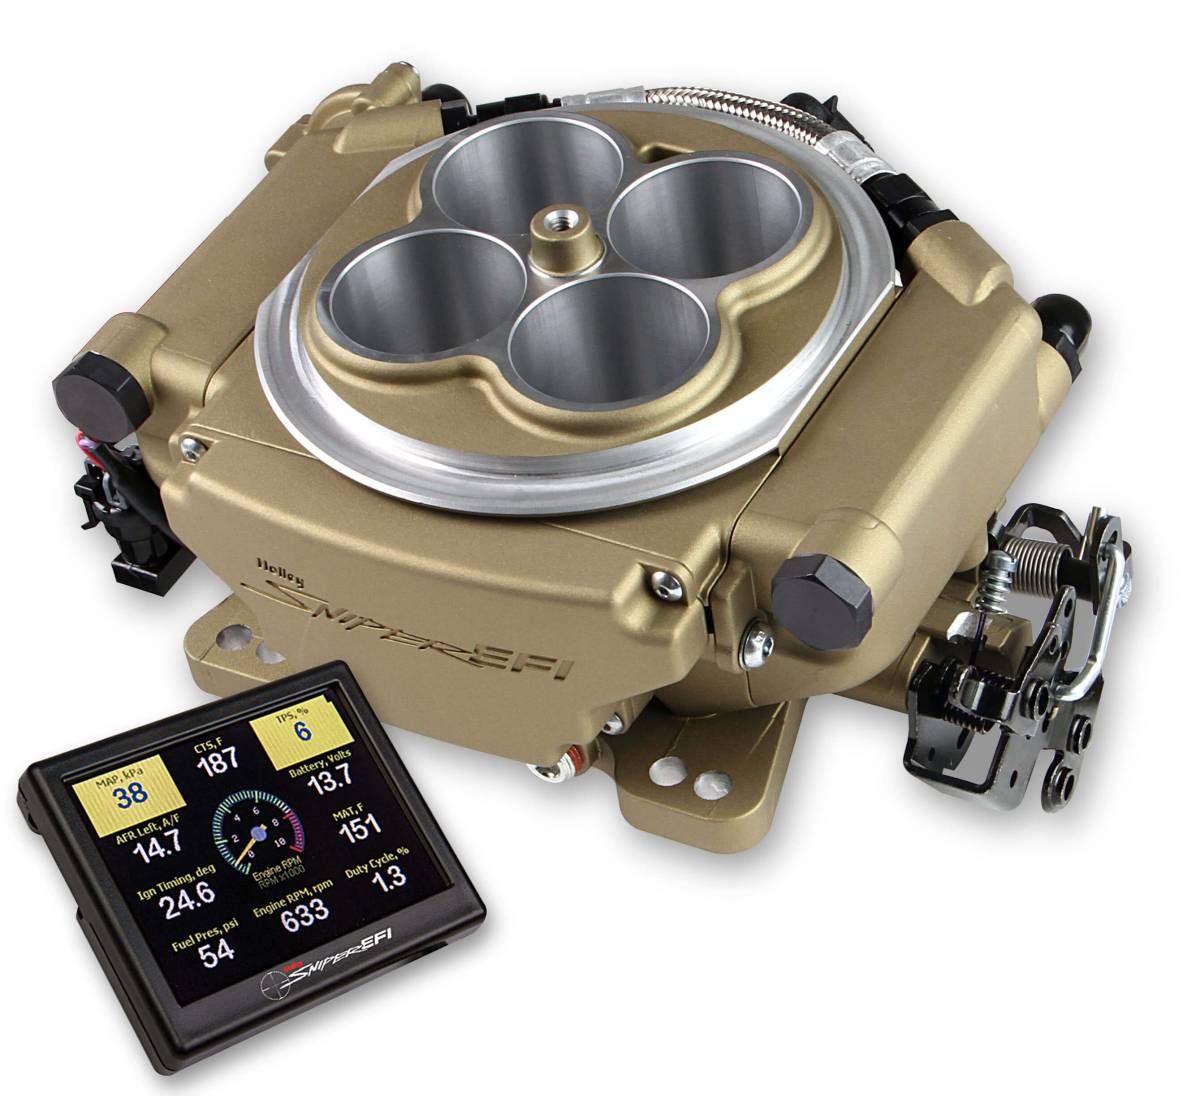 Holley - Holley Super Sniper EFI 4150 Self-Tuning Fuel Injection Kit 1250 HP - Classic Gold - Image 1